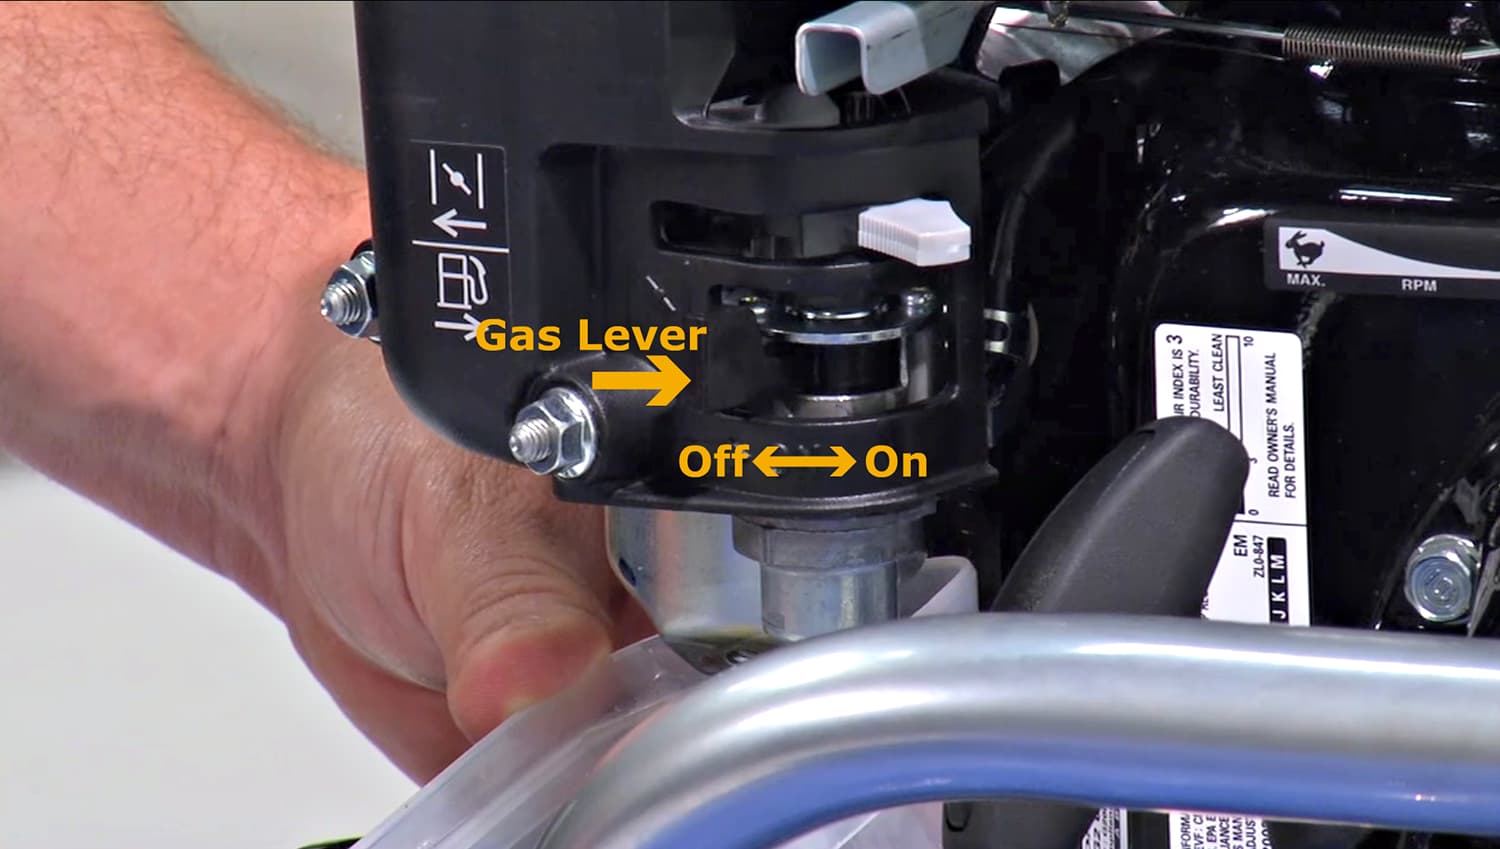 Turn Gas lever off